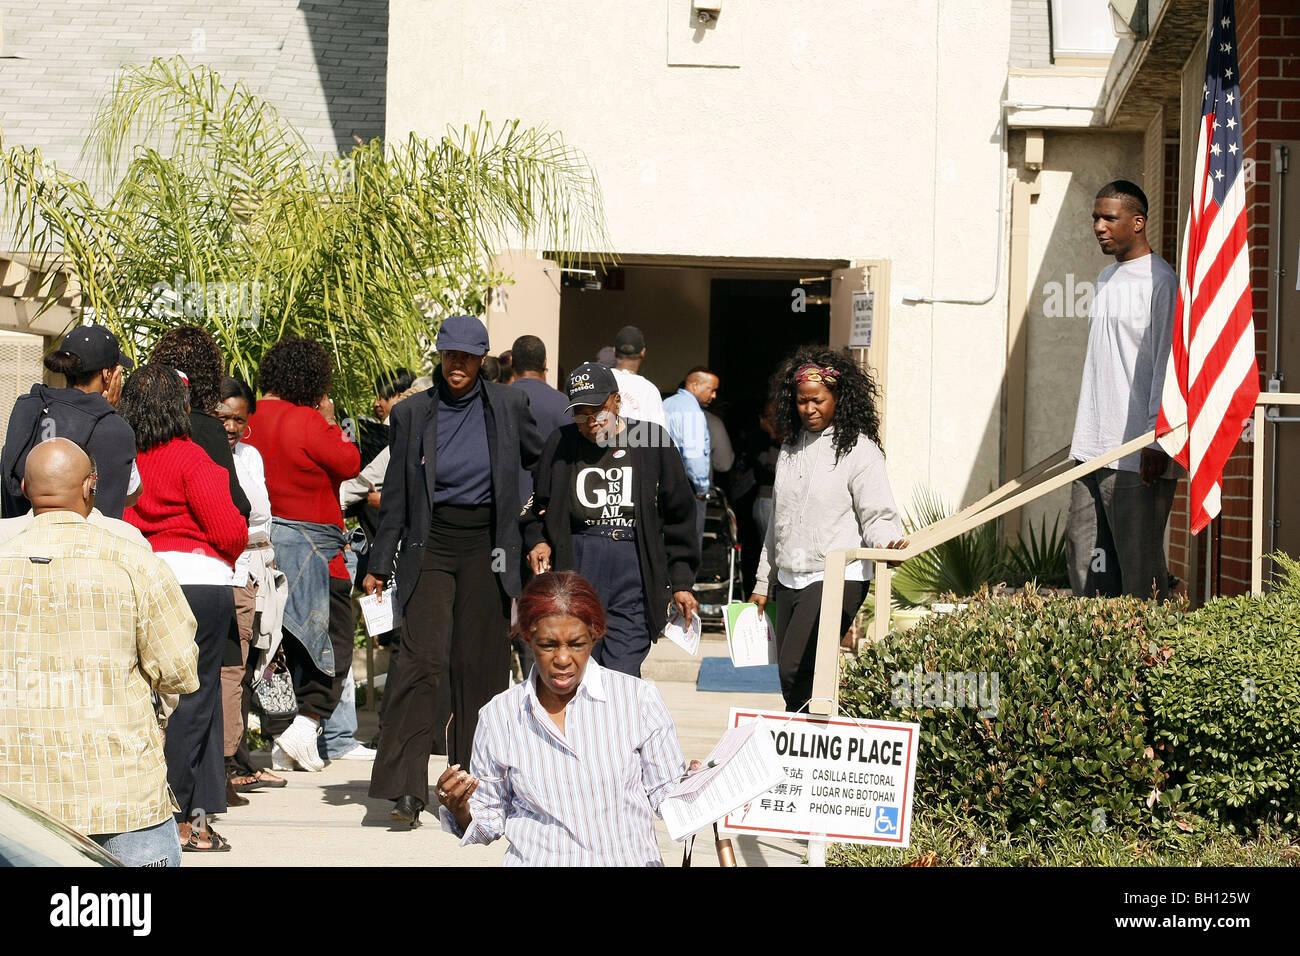 VOTERS QUEUE AT POLLING PLACE U.S. PRESIDENTIAL ELECTION 200 ATHENS  SOUTH LOS ANGELES  CA  USA 04/11/2008 Stock Photo